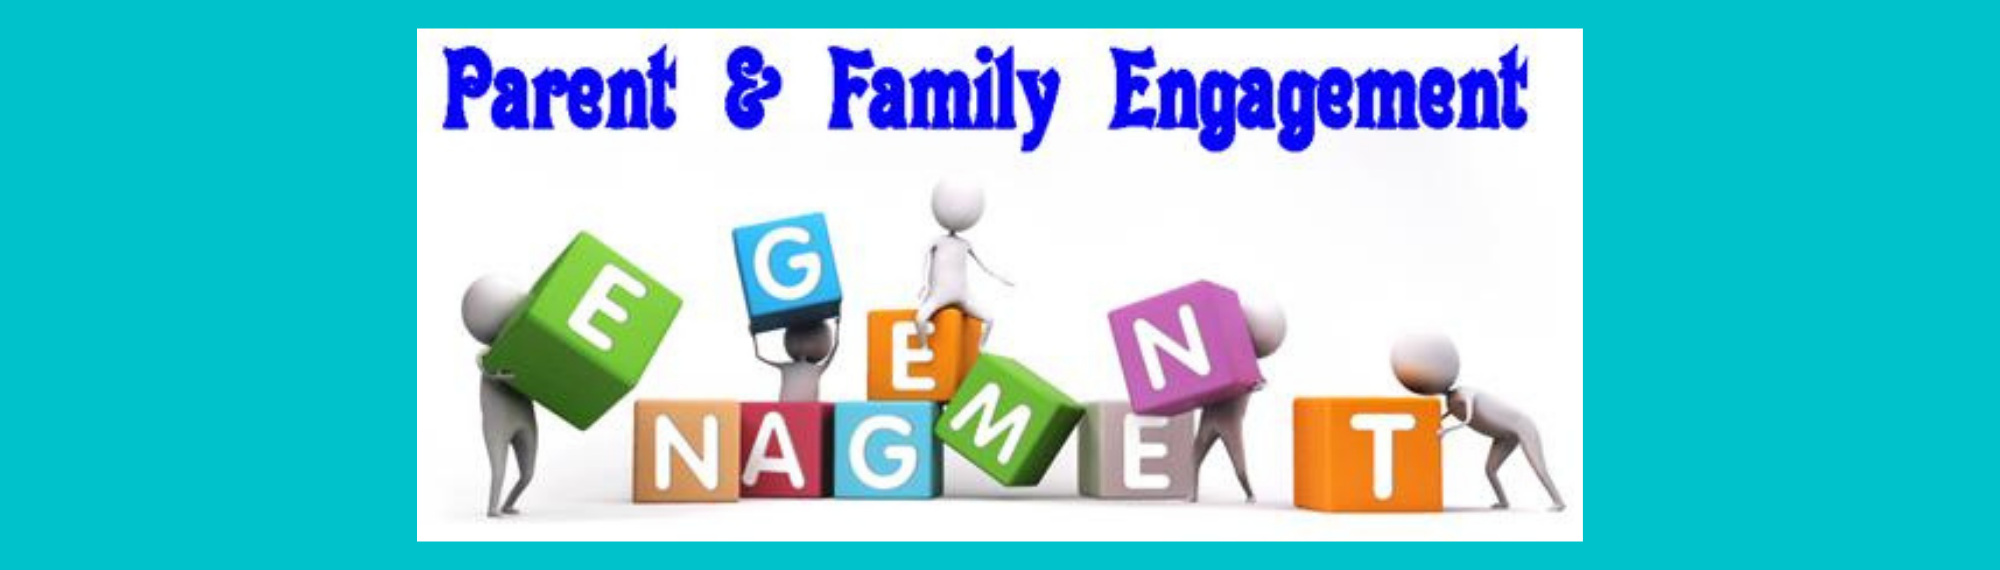 Parent and Family Engagement graphic